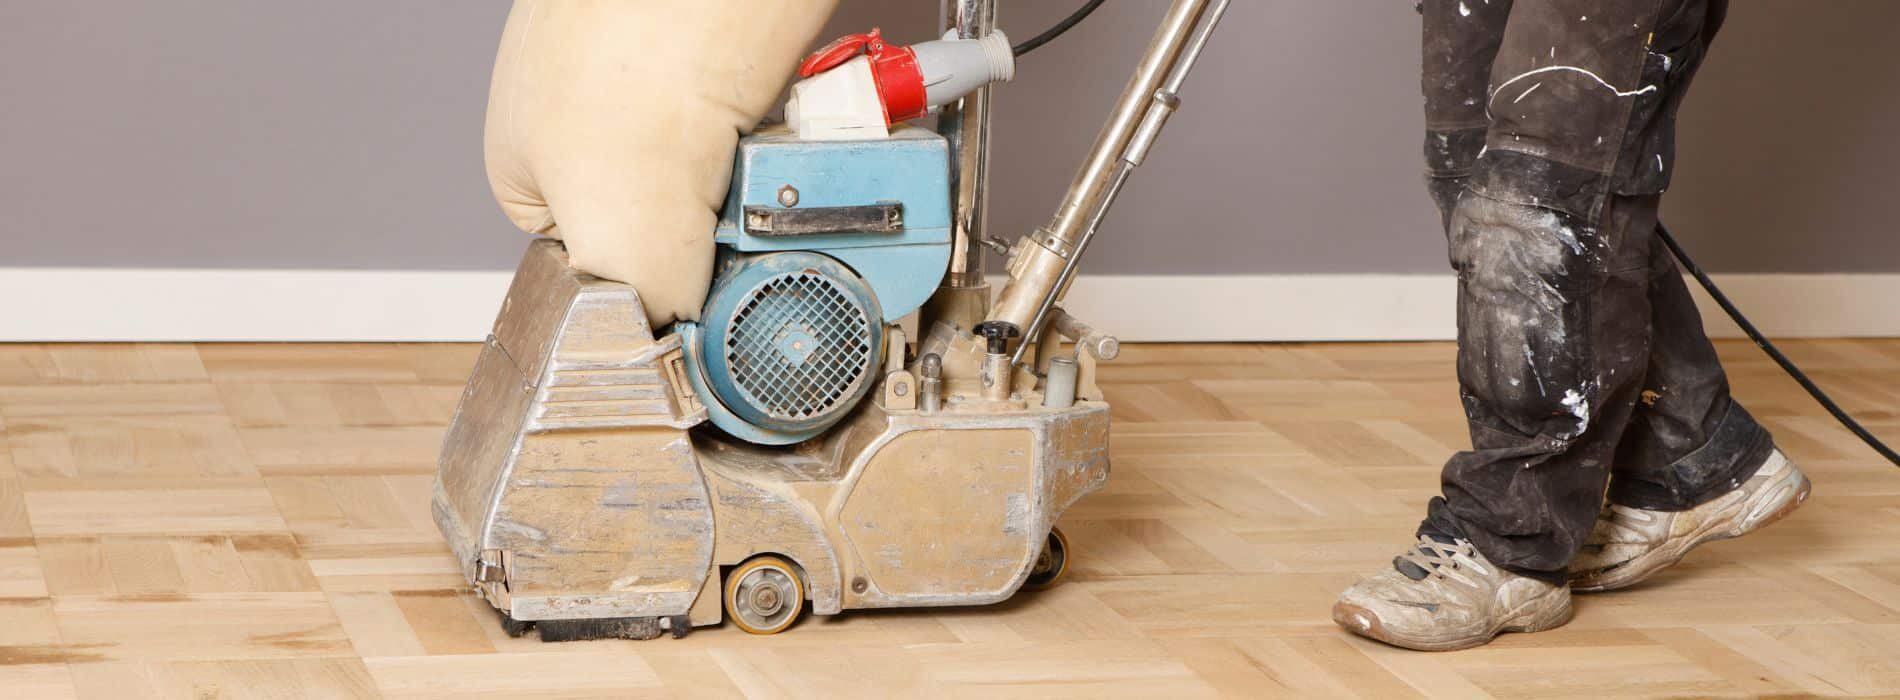 In Belvedere, DA17, Mr Sander® using a Orebro Belt sander to sand a parquet floor. The machine runs on 2.4 kW of power and requires a voltage of 230 V with a frequency of 50 Hz/60 Hz. The sander has a size of 250x750 mm and is connected to a dust extraction system that includes a HEPA filter, ensuring a clean and efficient sanding process.